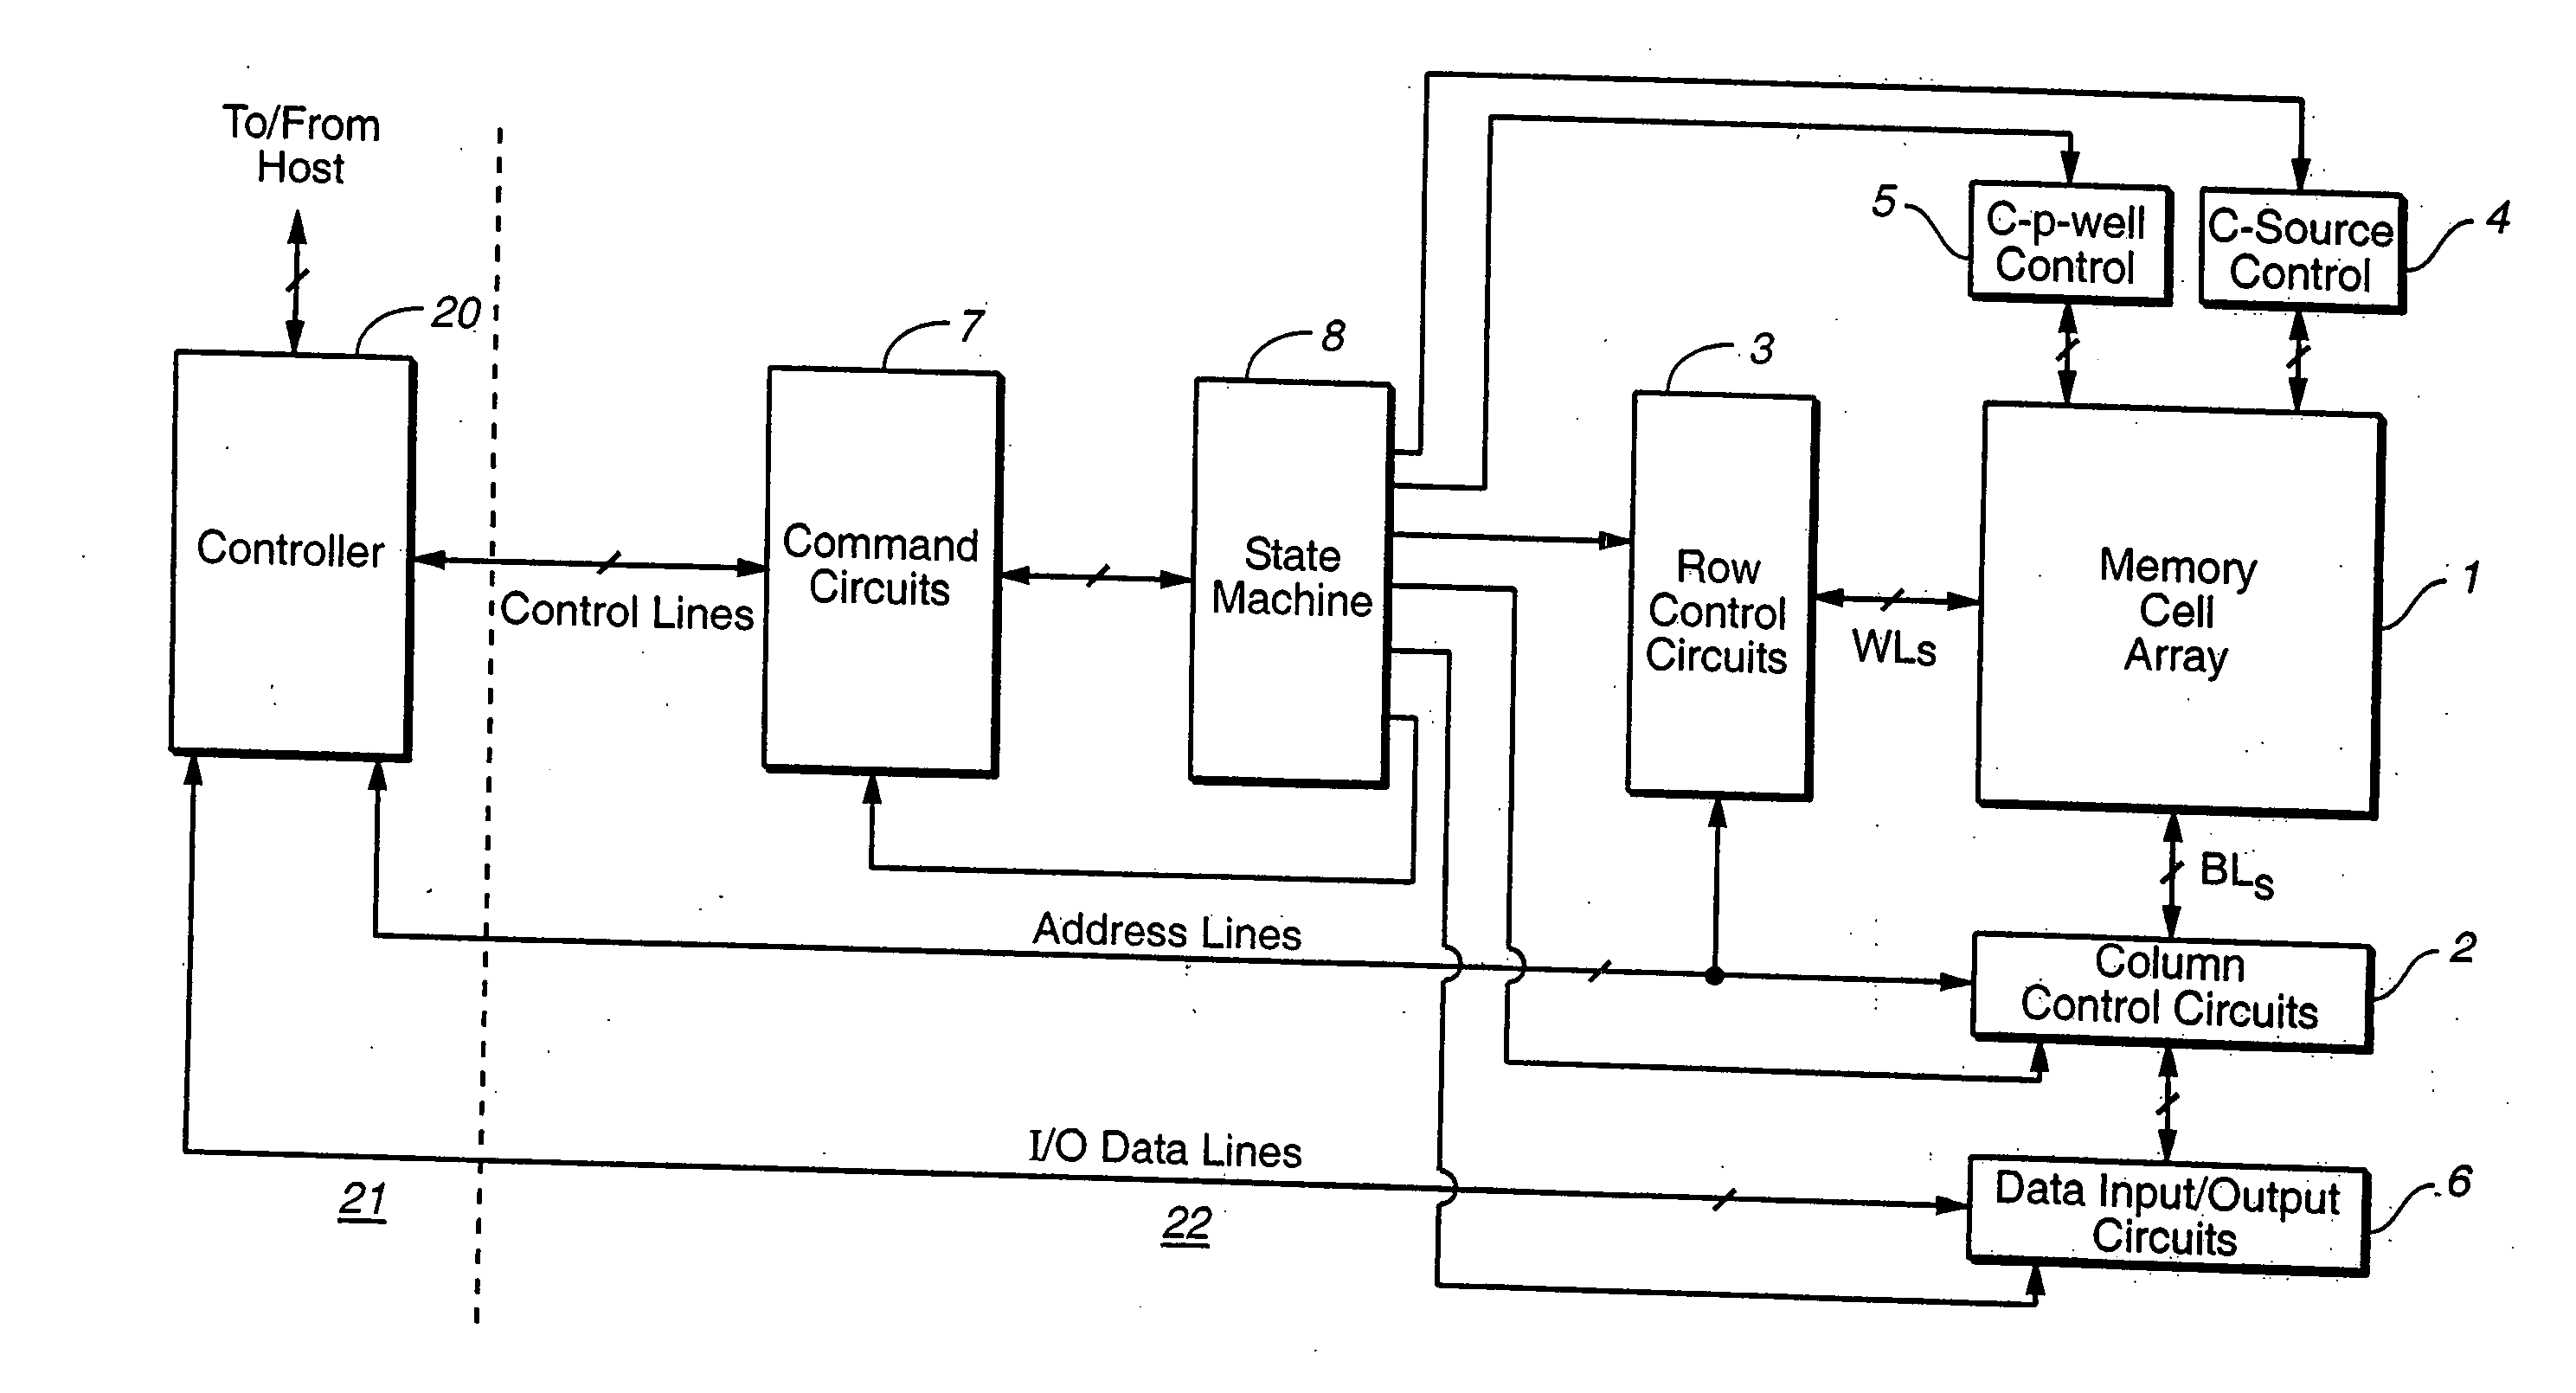 Operating techniques for reducing effects of coupling between storage elements of a non-volatile memory operated in multiple data states